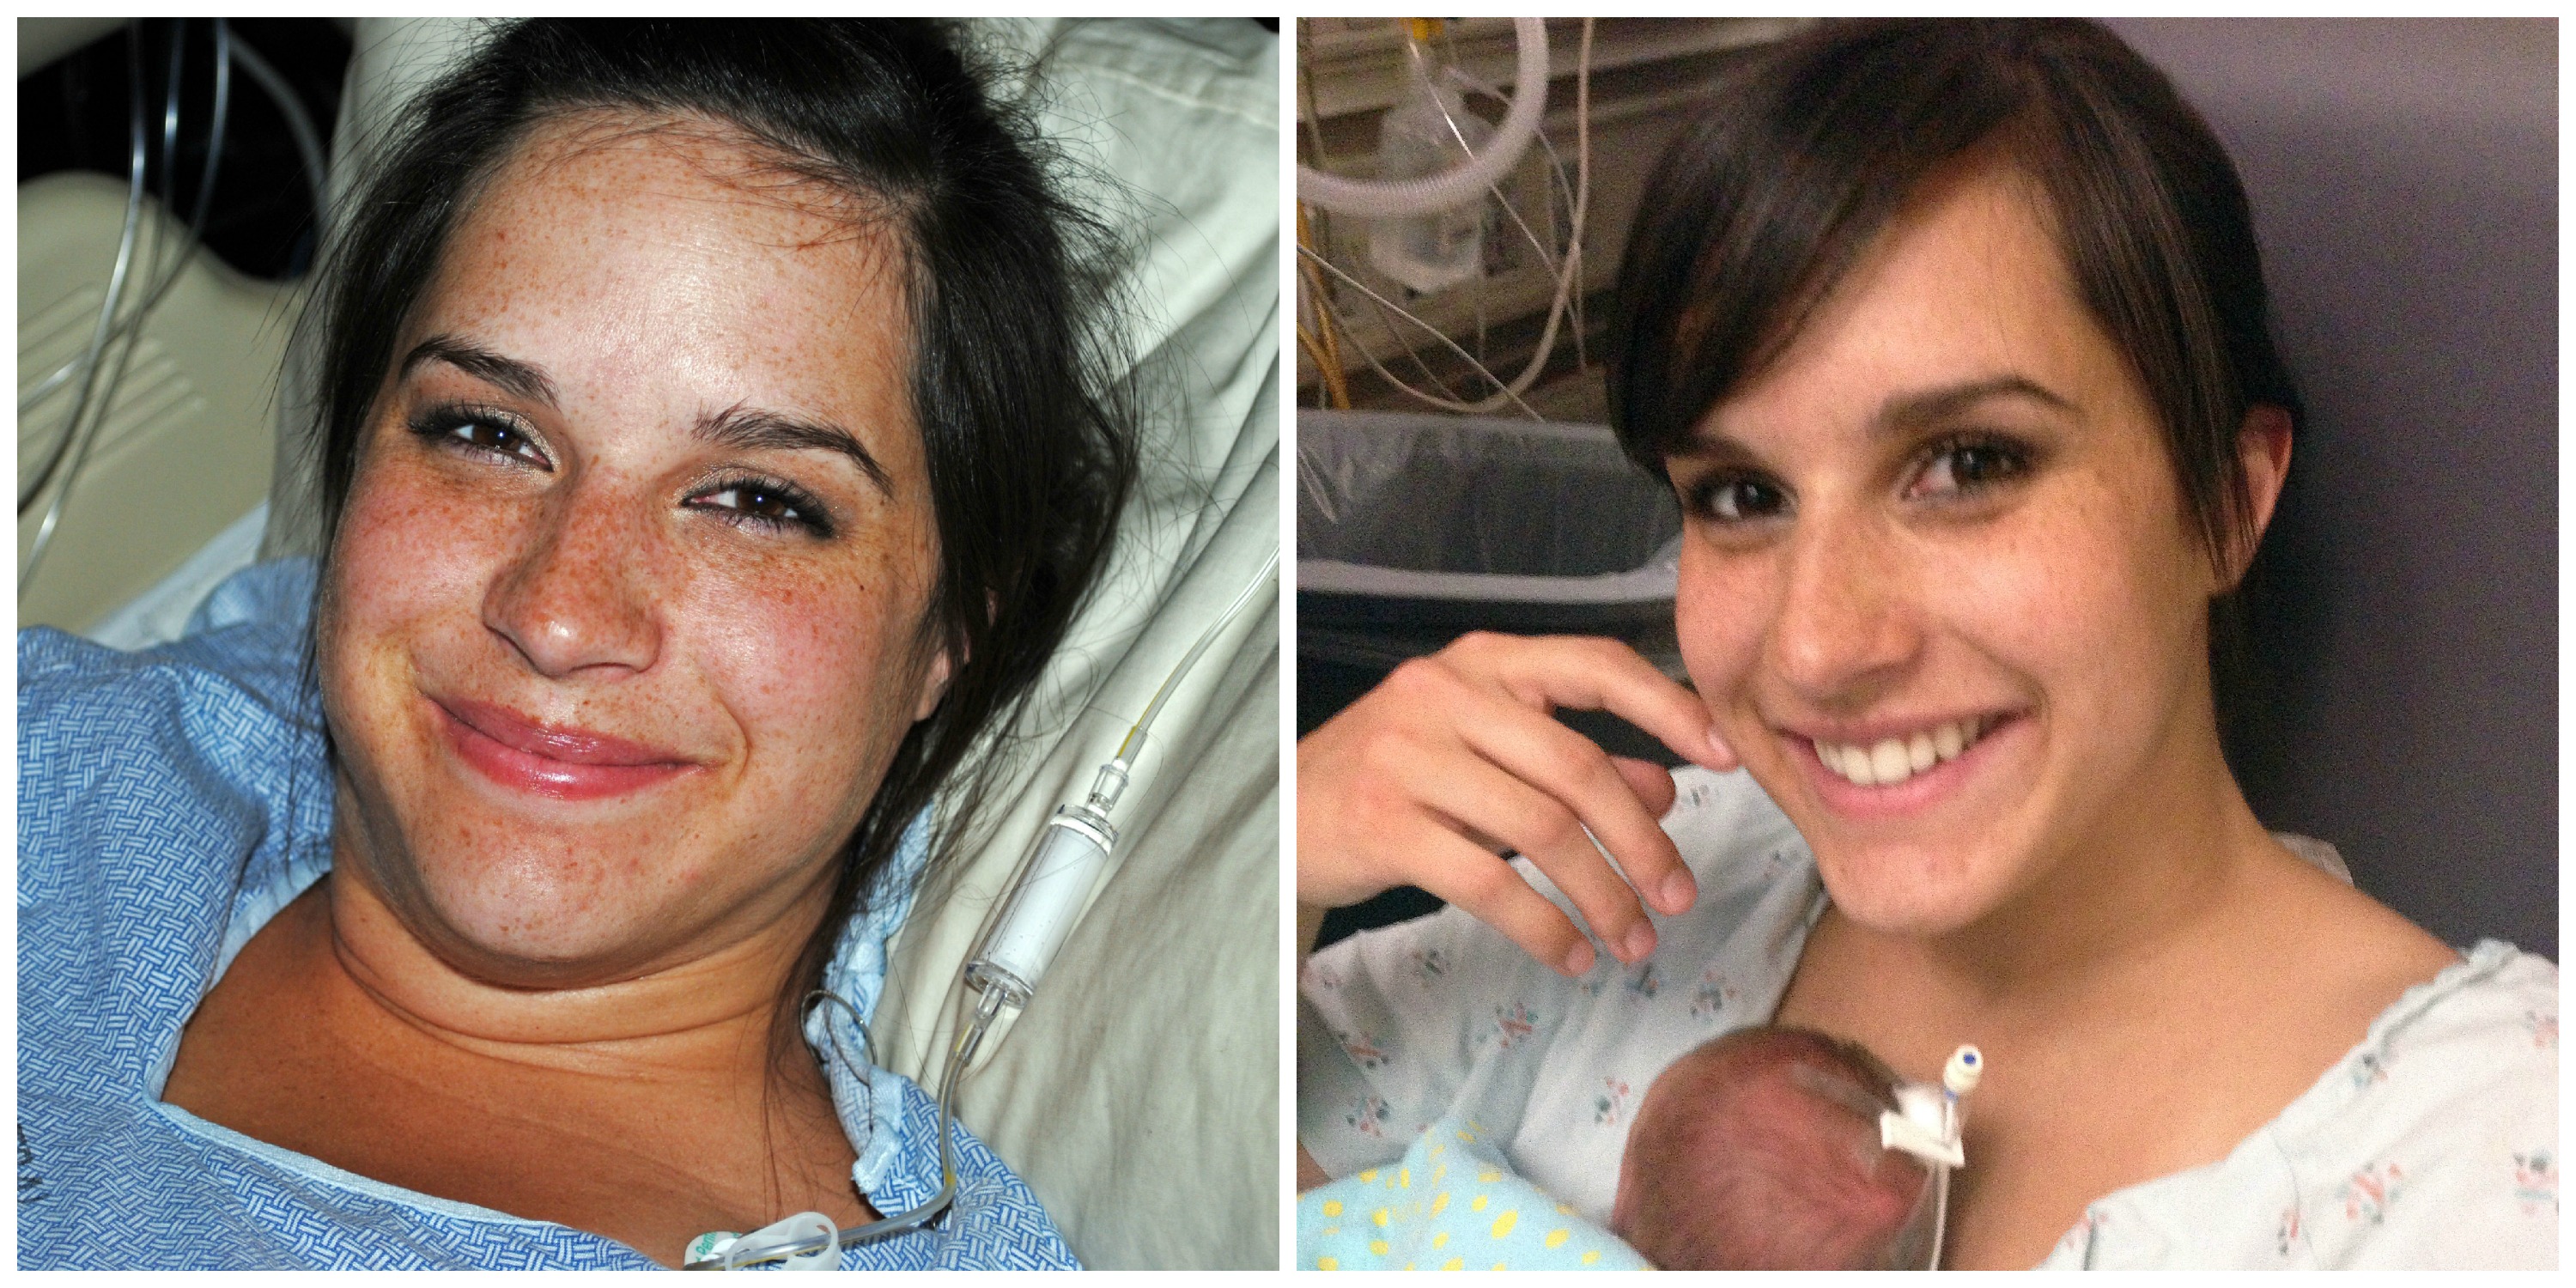 Tricia's face during and after preeclampsia